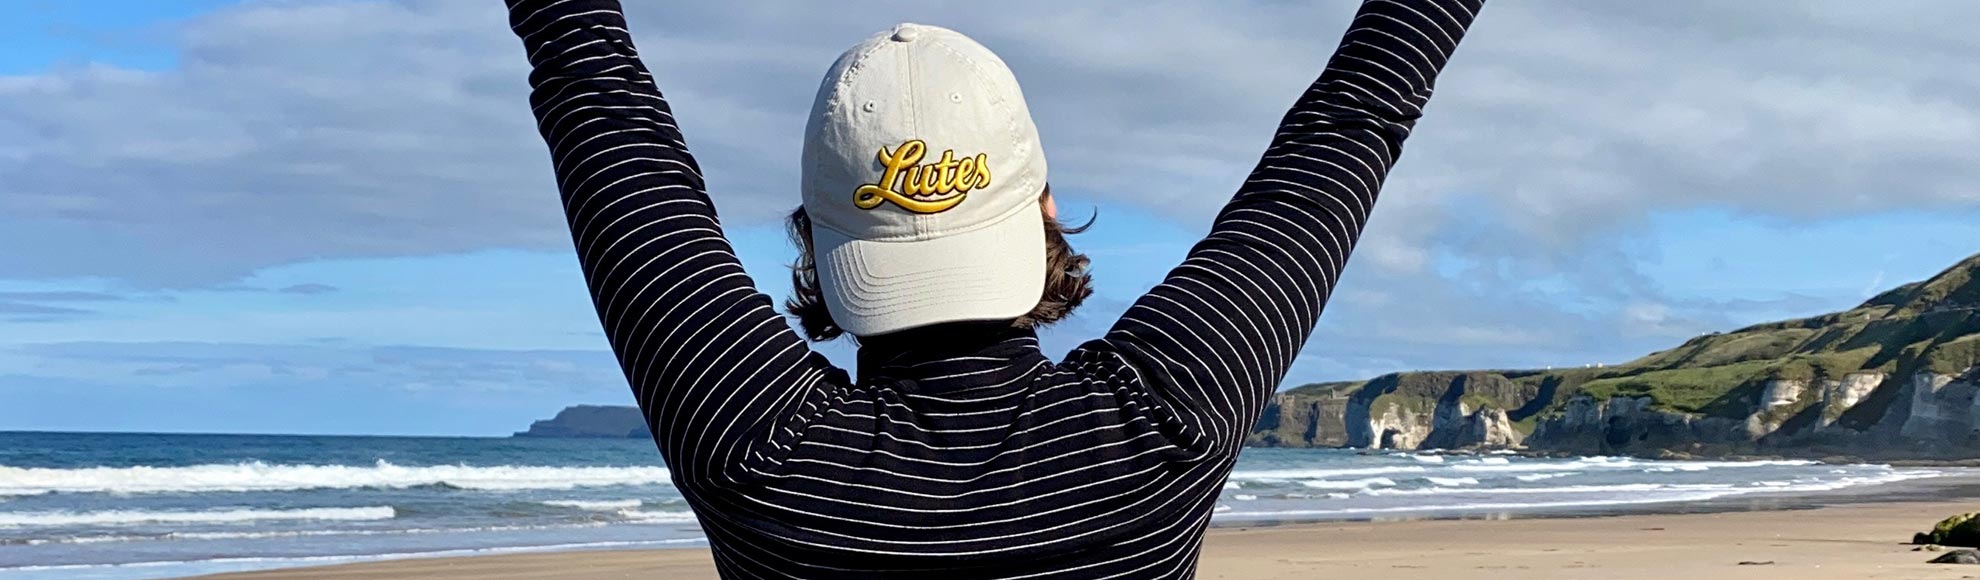 A PLU student in the foreground, wearing a PLU hat, with the ocean and a beach in front of them.